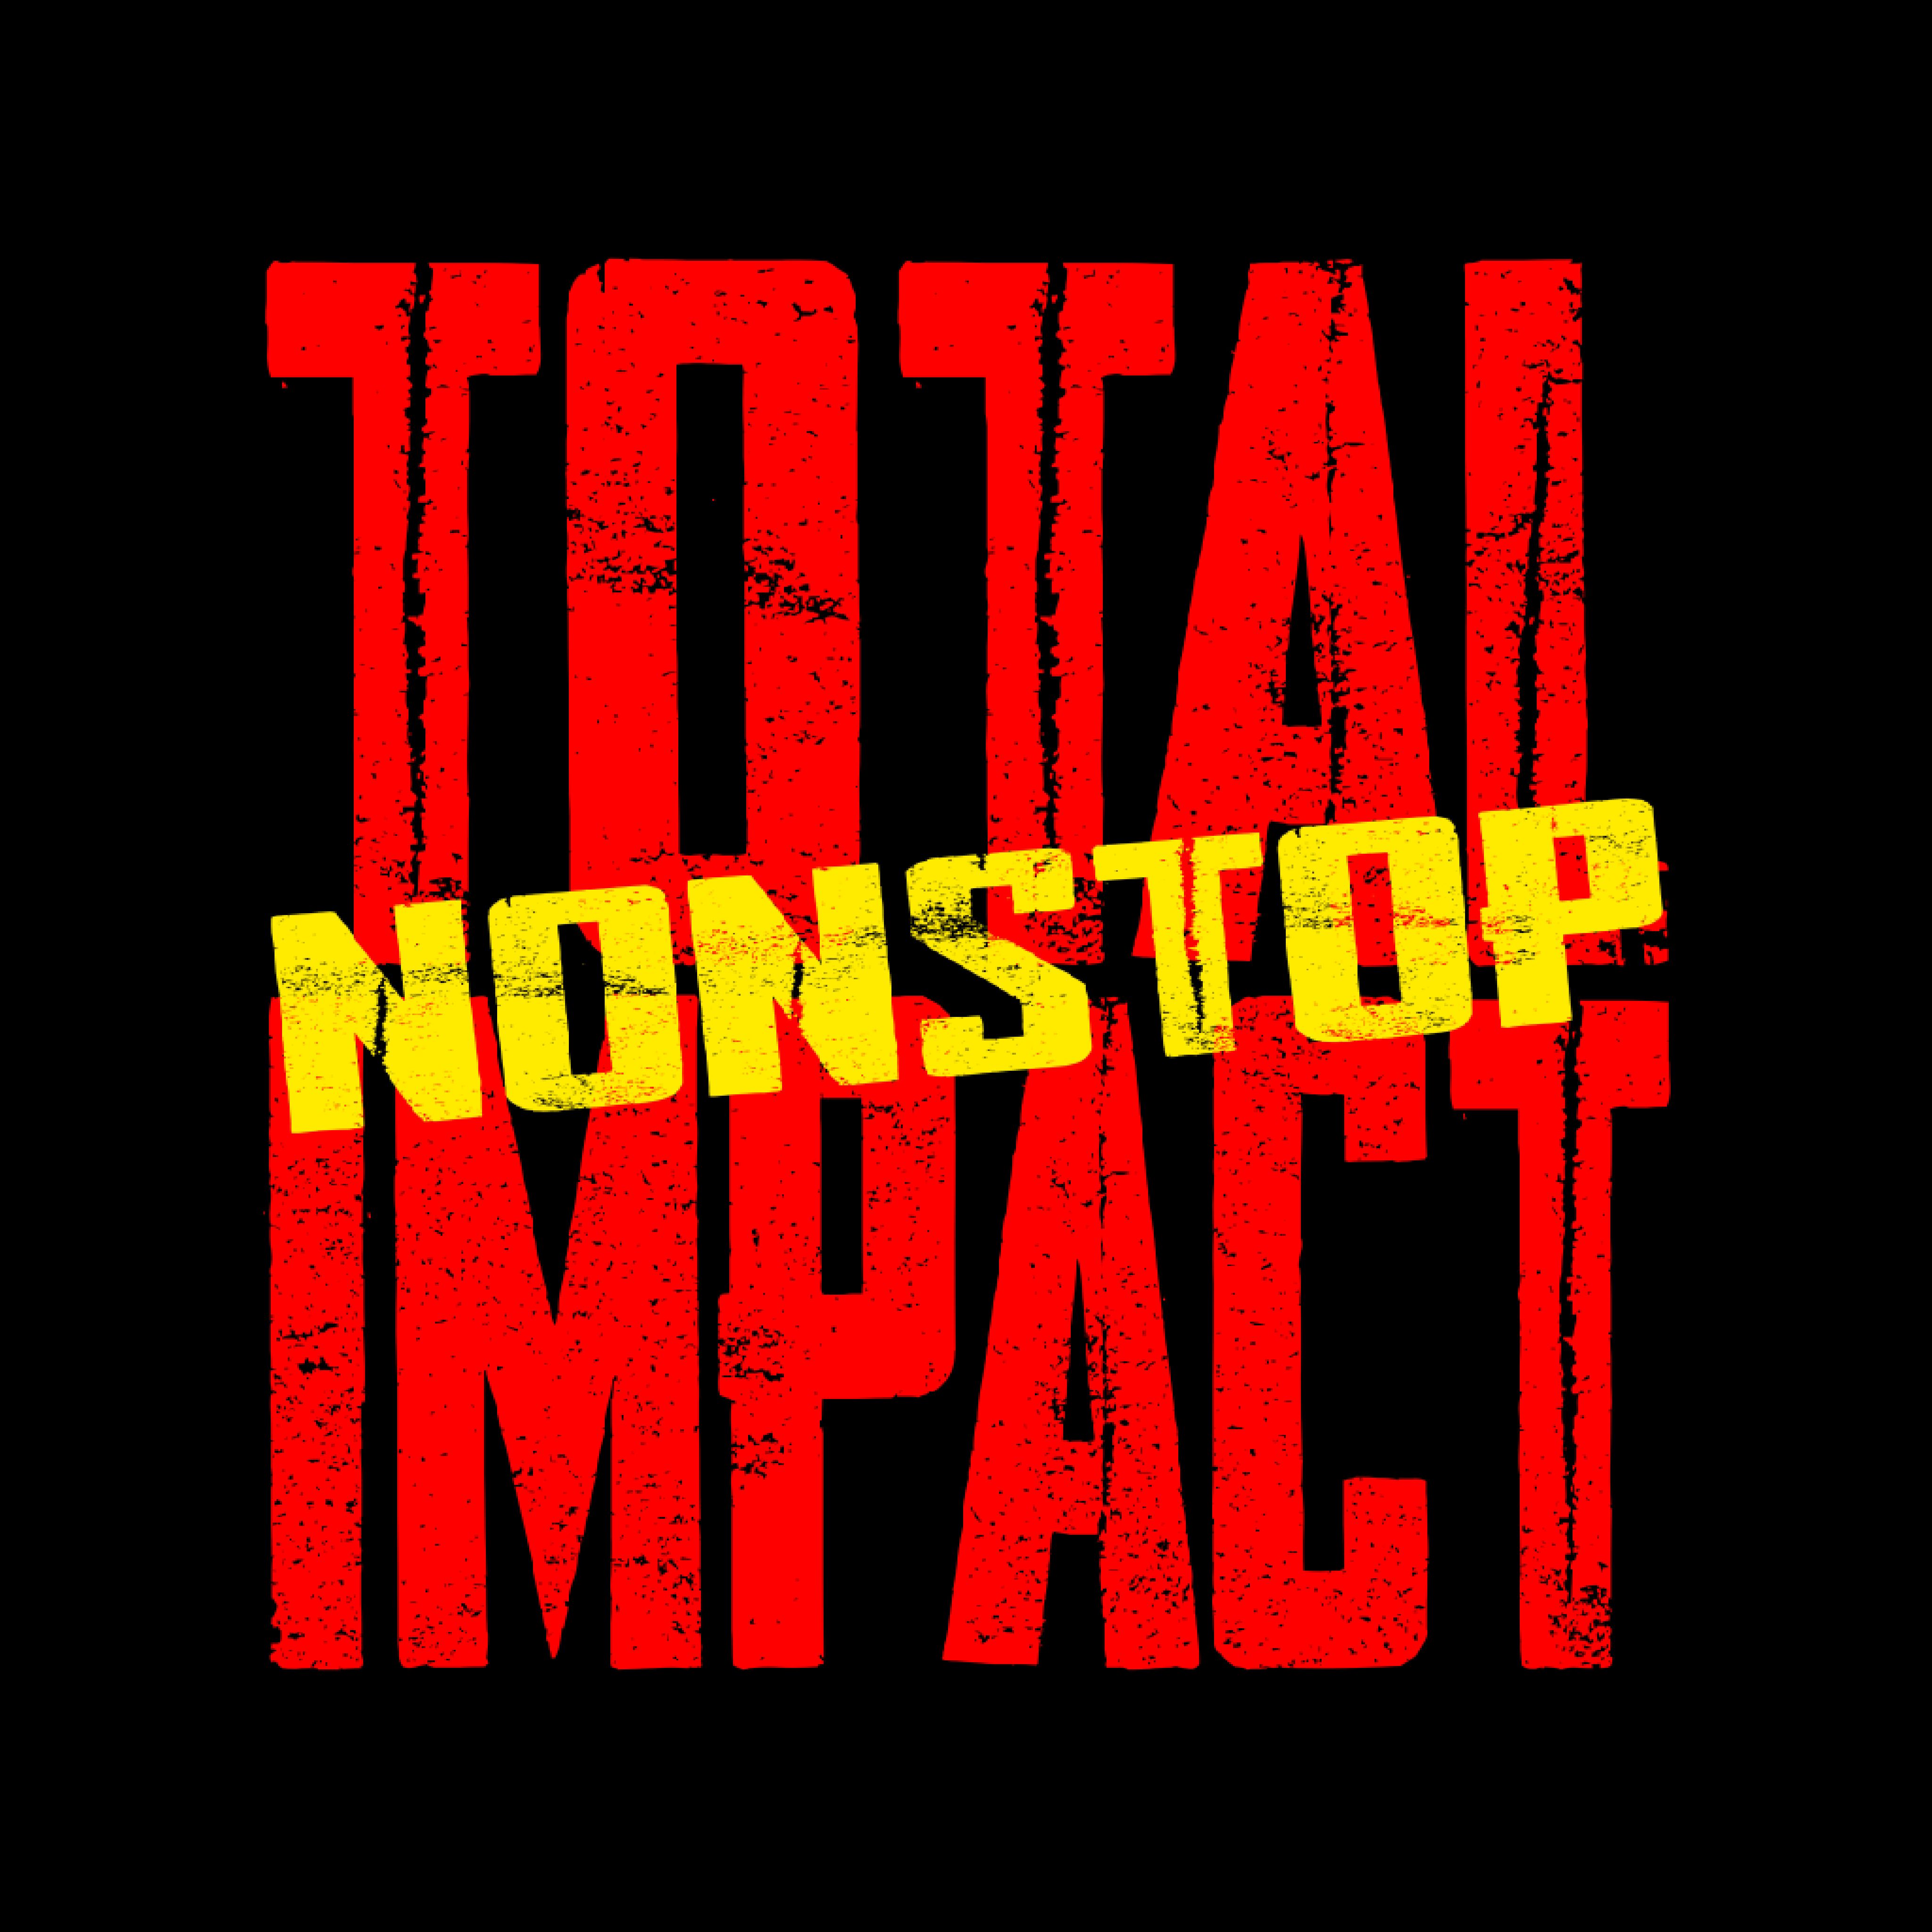 Total Nonstop Impact | IMPACT Wrestling Podcast